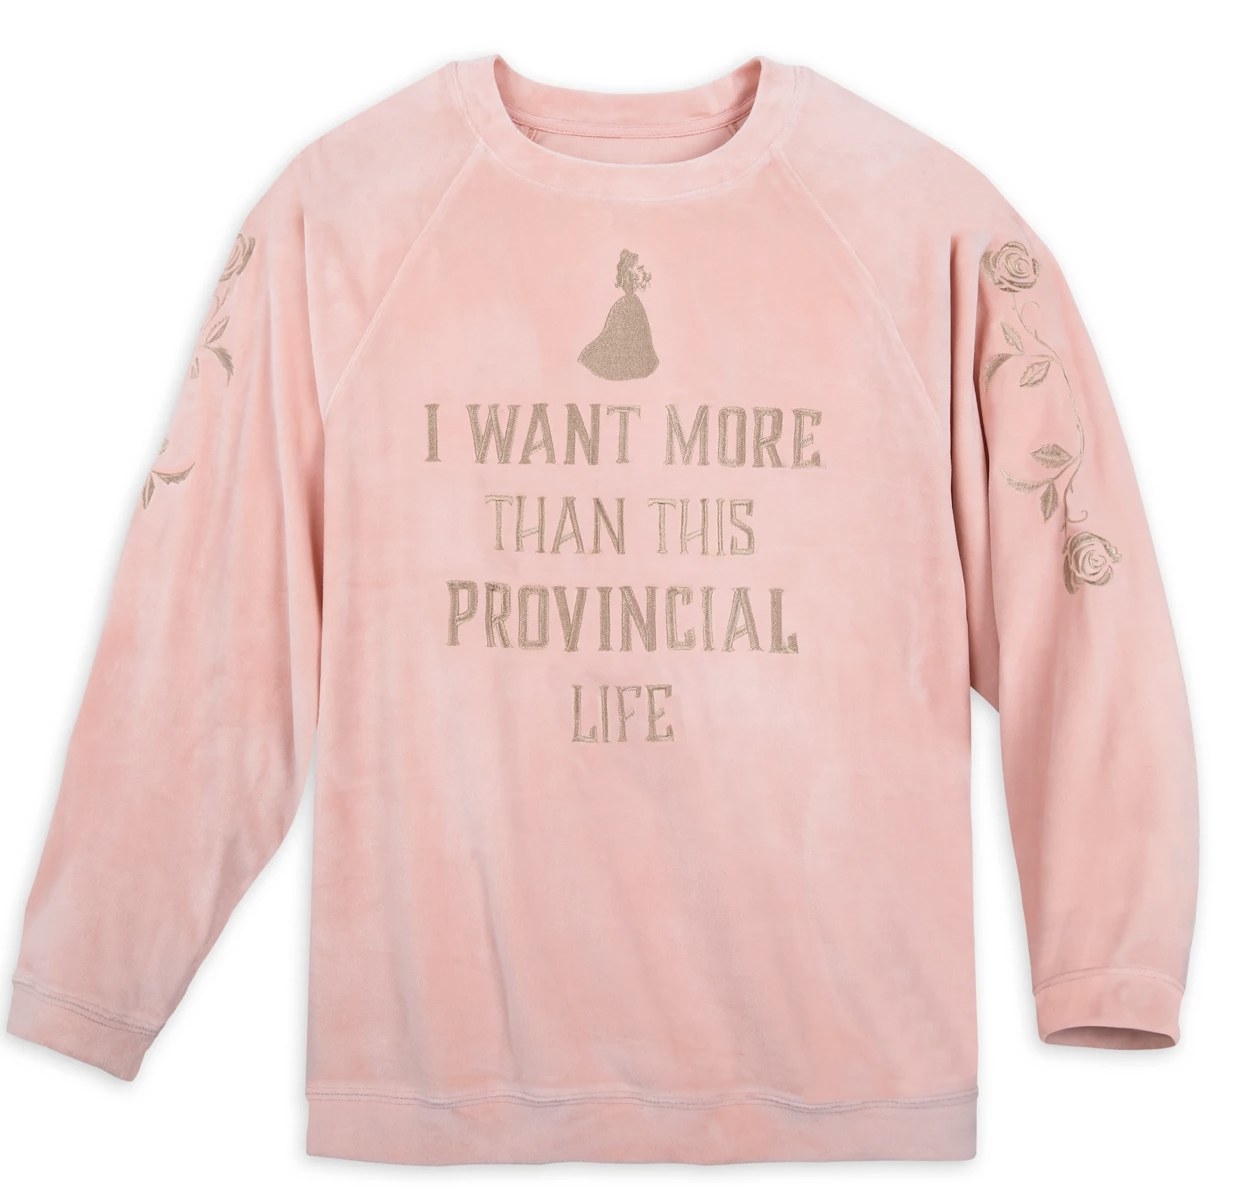 Long sleeve pink velour sweatshirt with &quot;I want more than this provincial life&quot; embroidery